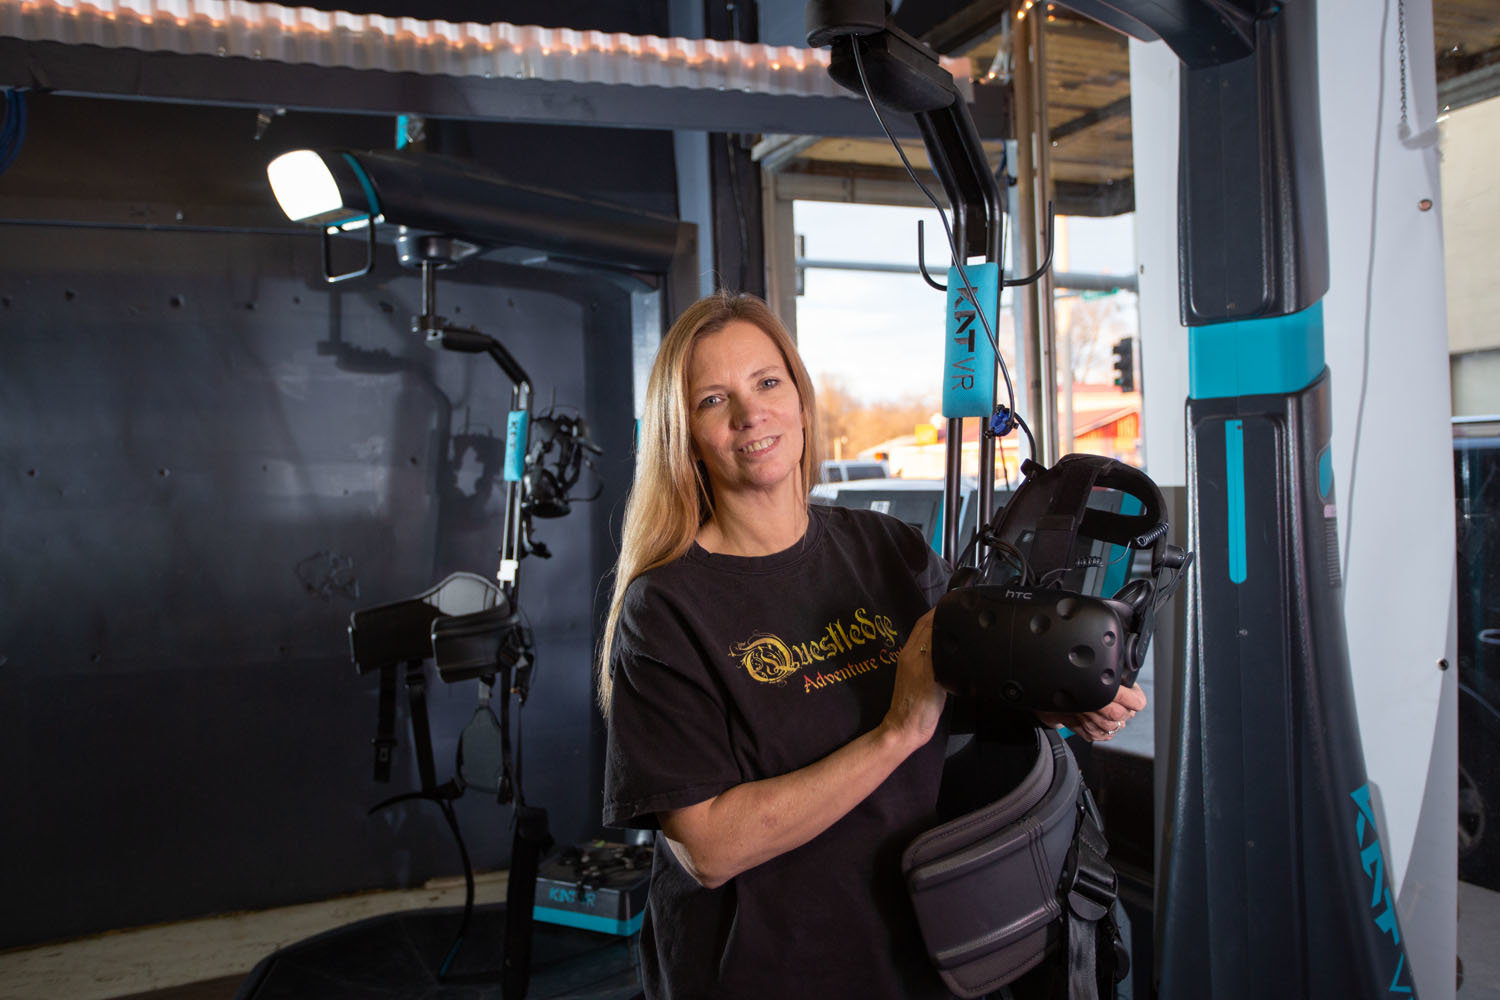 FUN AND GAMES: Virtual reality games are among the offerings Questledge owner Debbie Moore provides at her entertainment venue in Nixa.